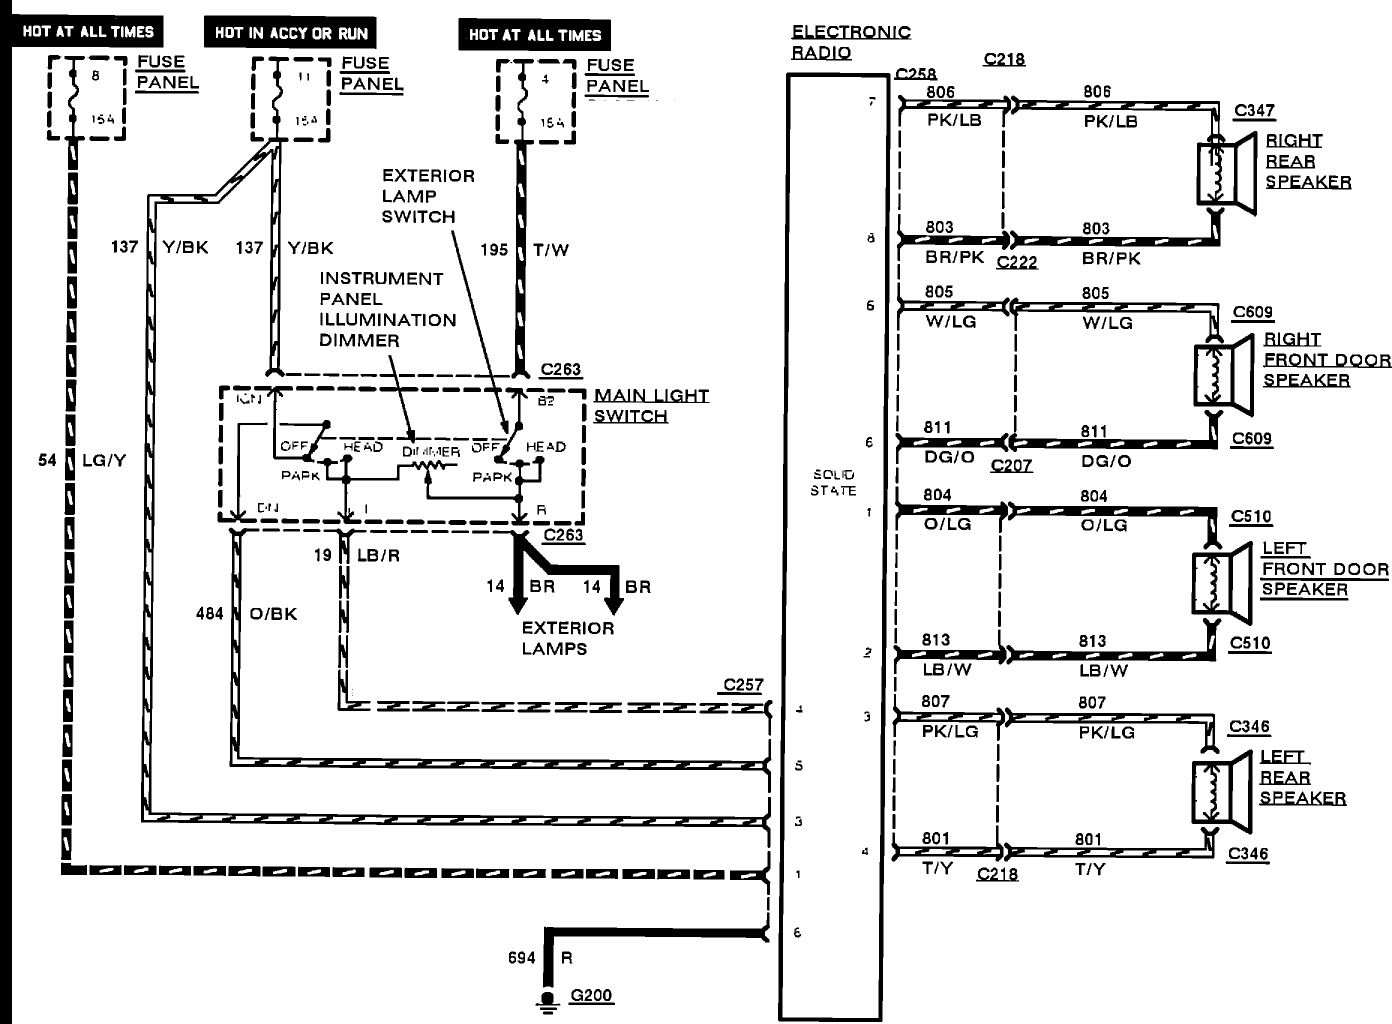 1992 Ford tempo stereo wiring diagram #10